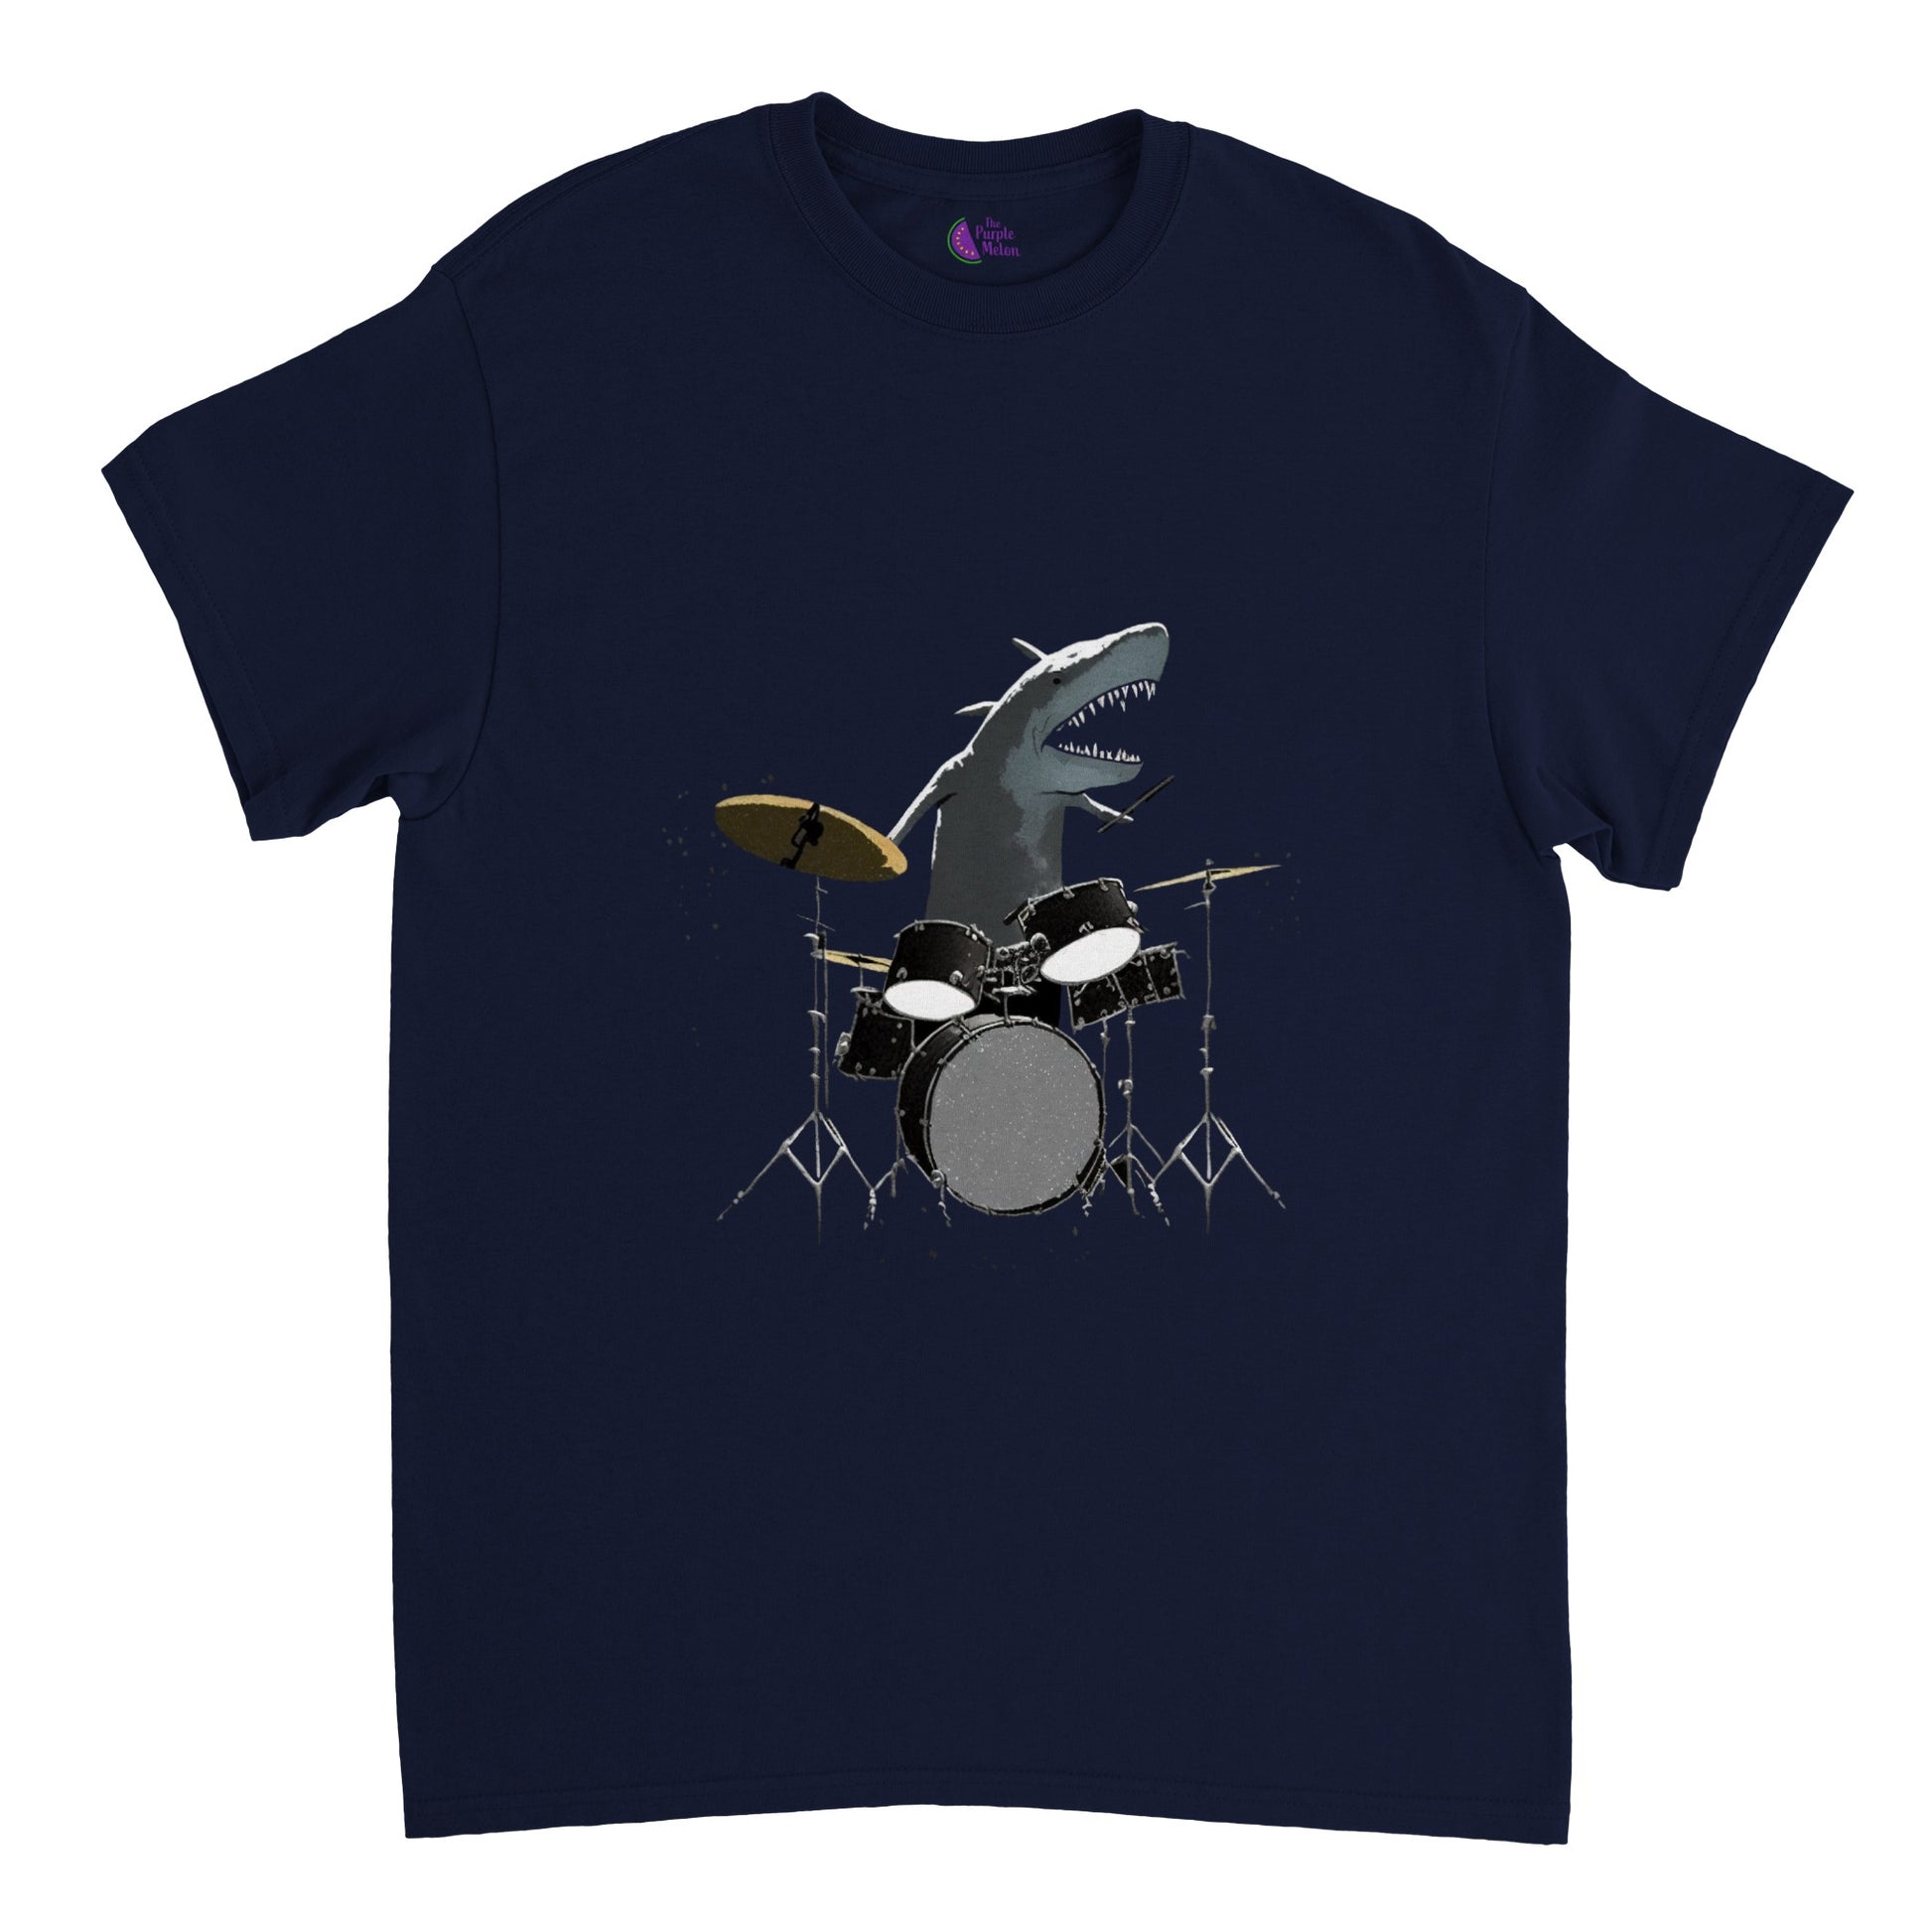 Navy t-shirt with a shark playing drums illustration